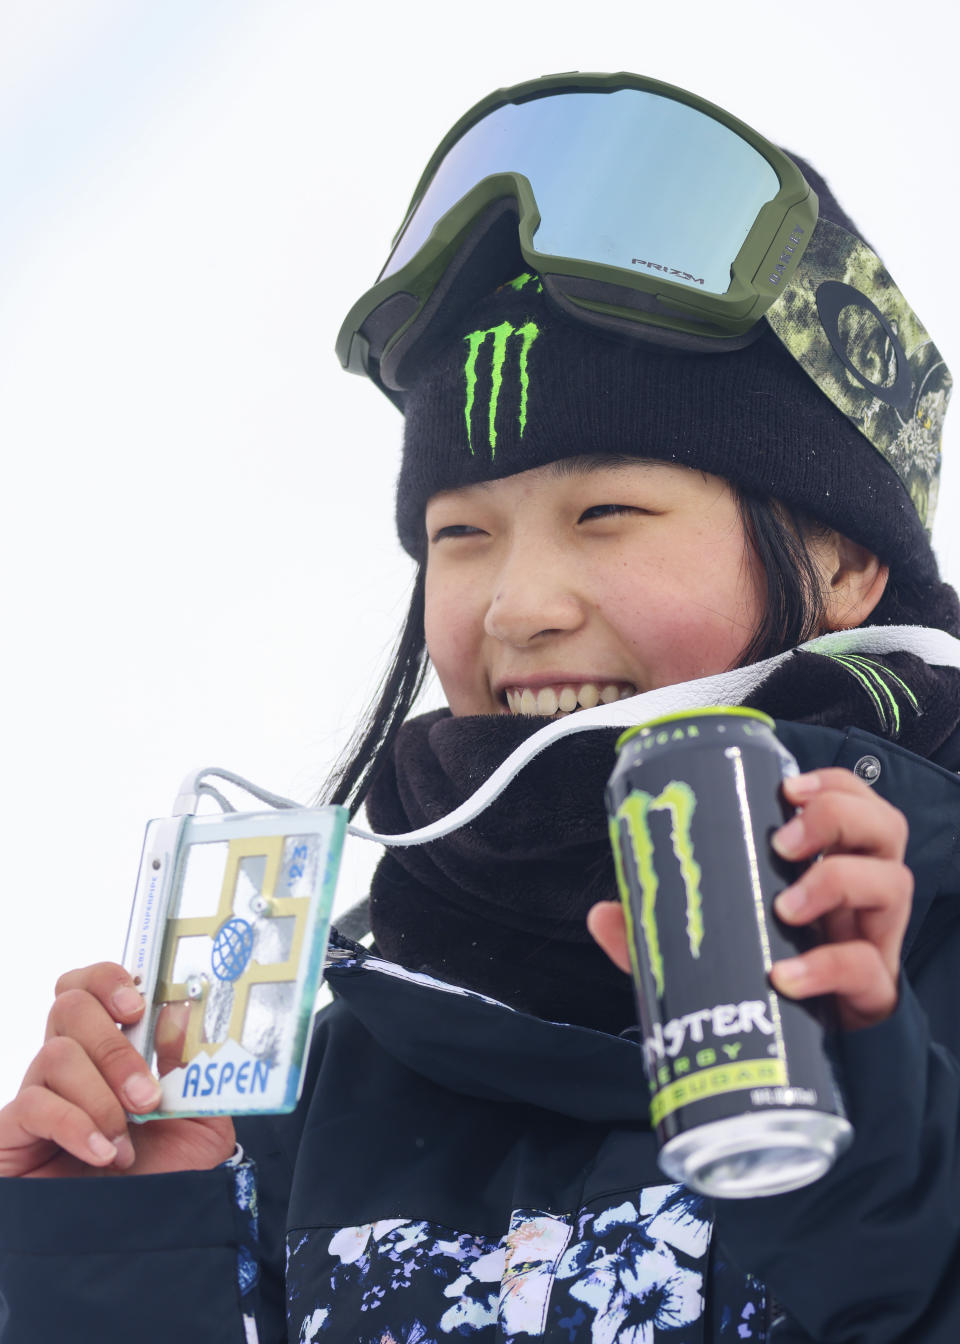 FILE -South Korea's Gaon Choi celebrates on the X Games Aspen podium after winning a gold medal in the women's snowboard halfpipe final on Saturday, Jan. 28, 2023, at Buttermilk Ski Area. (Austin Colbert/The Aspen Times via AP, File, File)